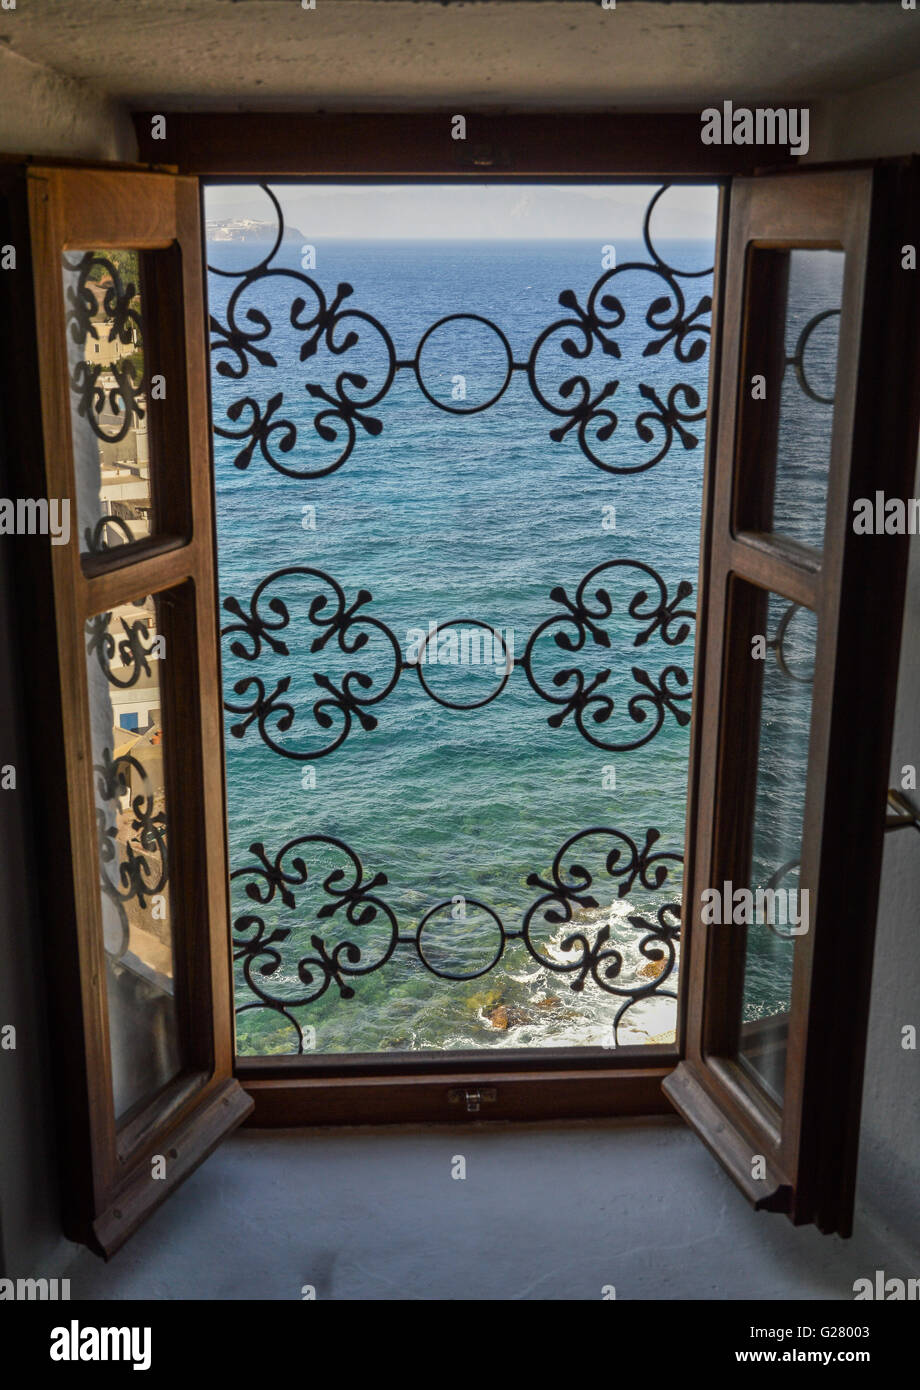 Looking through an ornate wrought iron grill on open Greek window looking out to sea ocean below, Greece Stock Photo